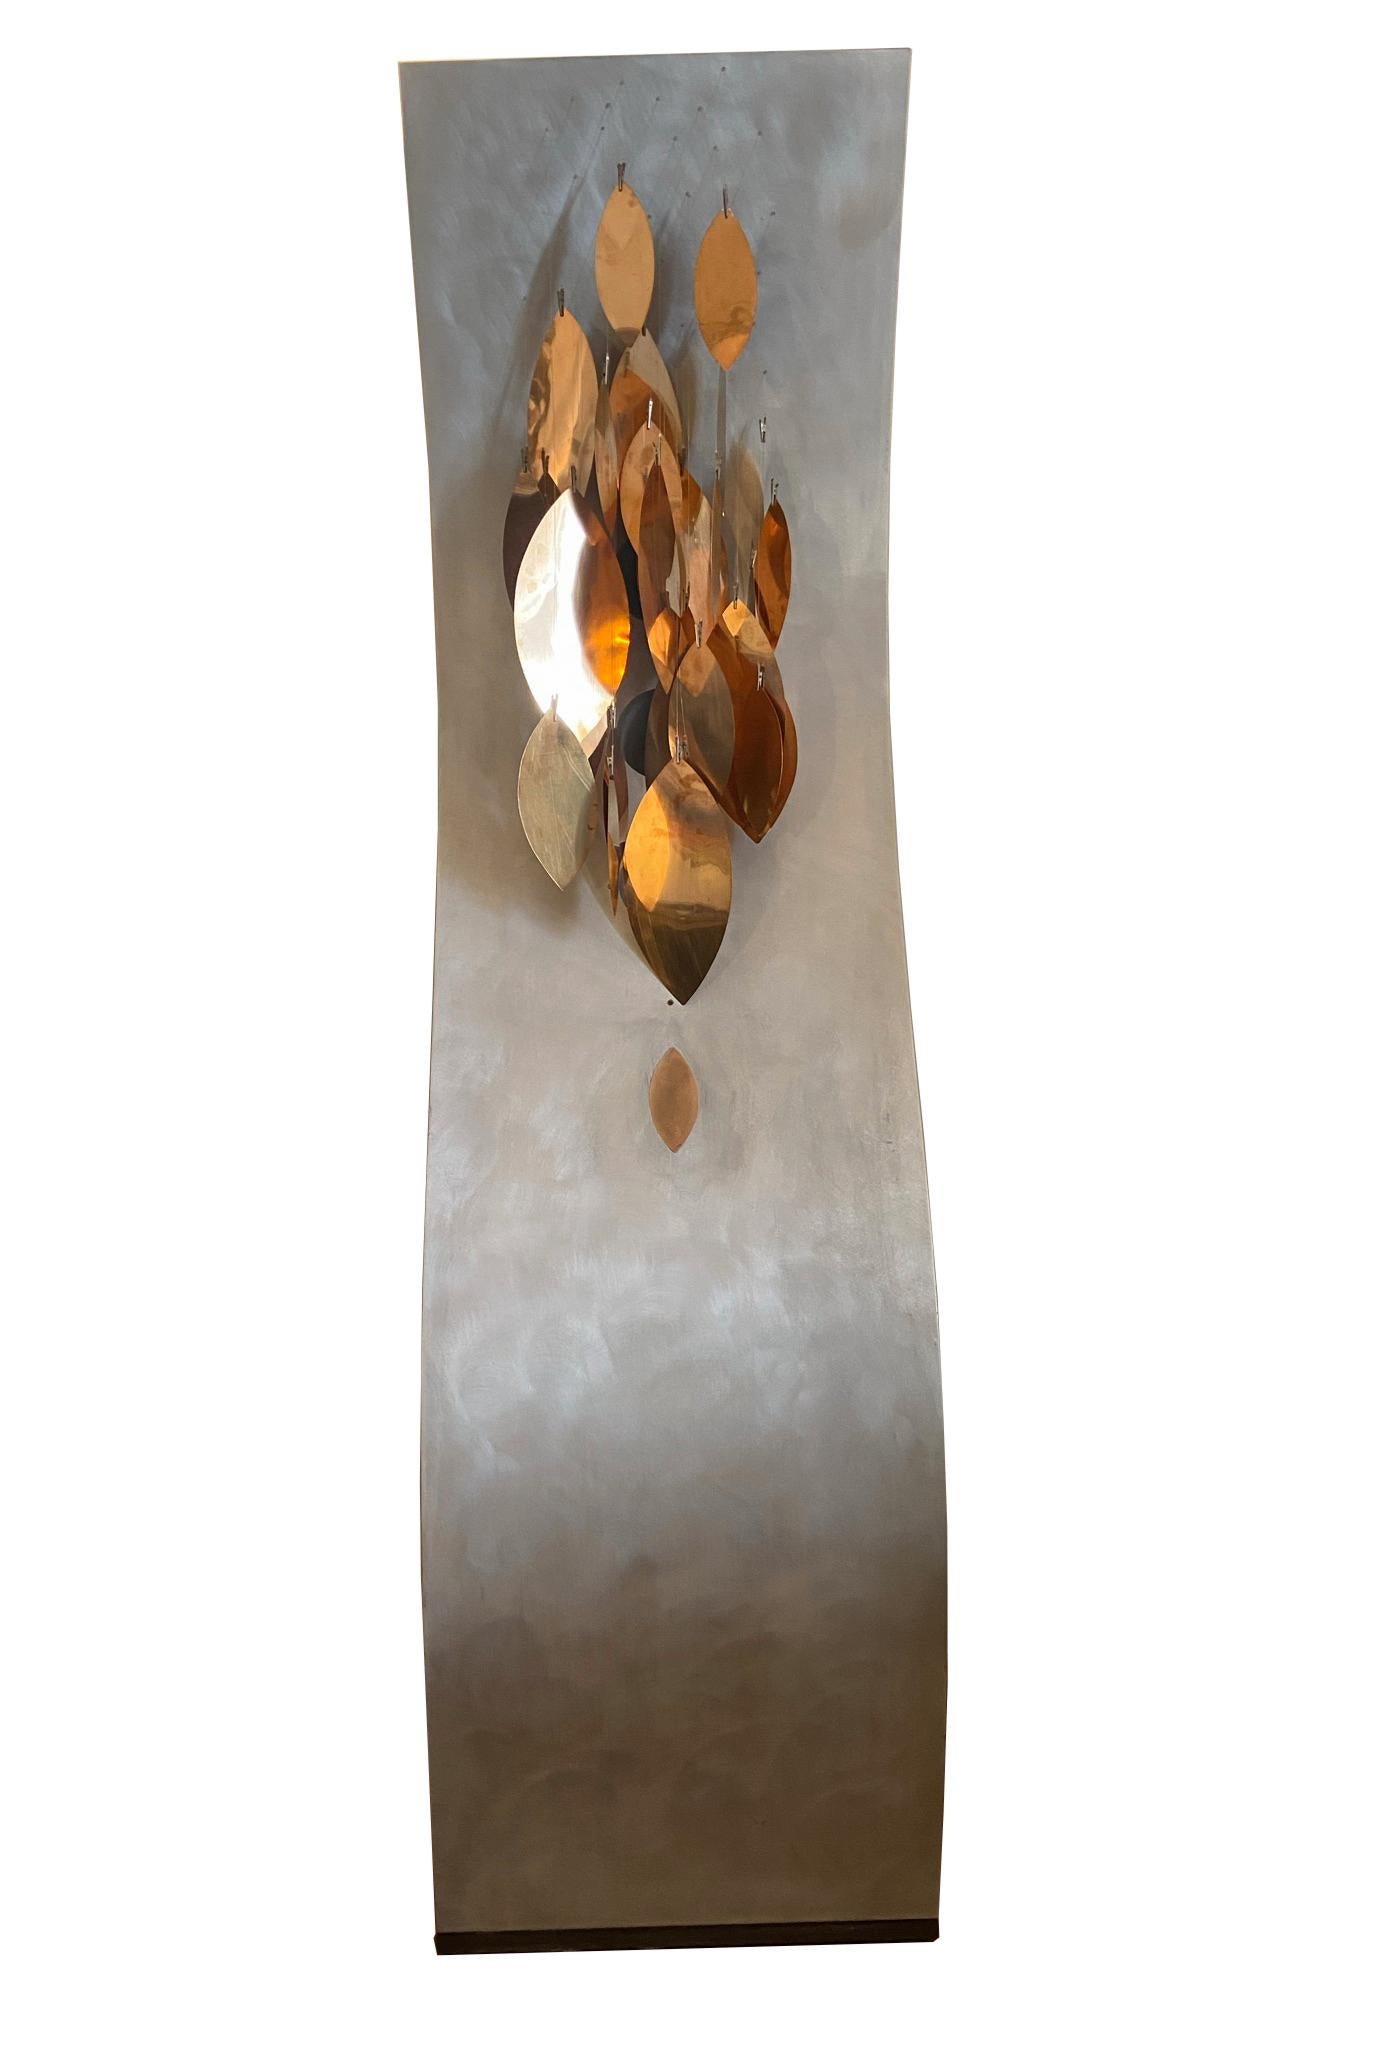 Rare and original floor lamp with aluminum structure and copper leaves.
The lamp separates the light source from the illuminating object, which thus acquires an independent aesthetic value.
It is a handcrafted object, therefore